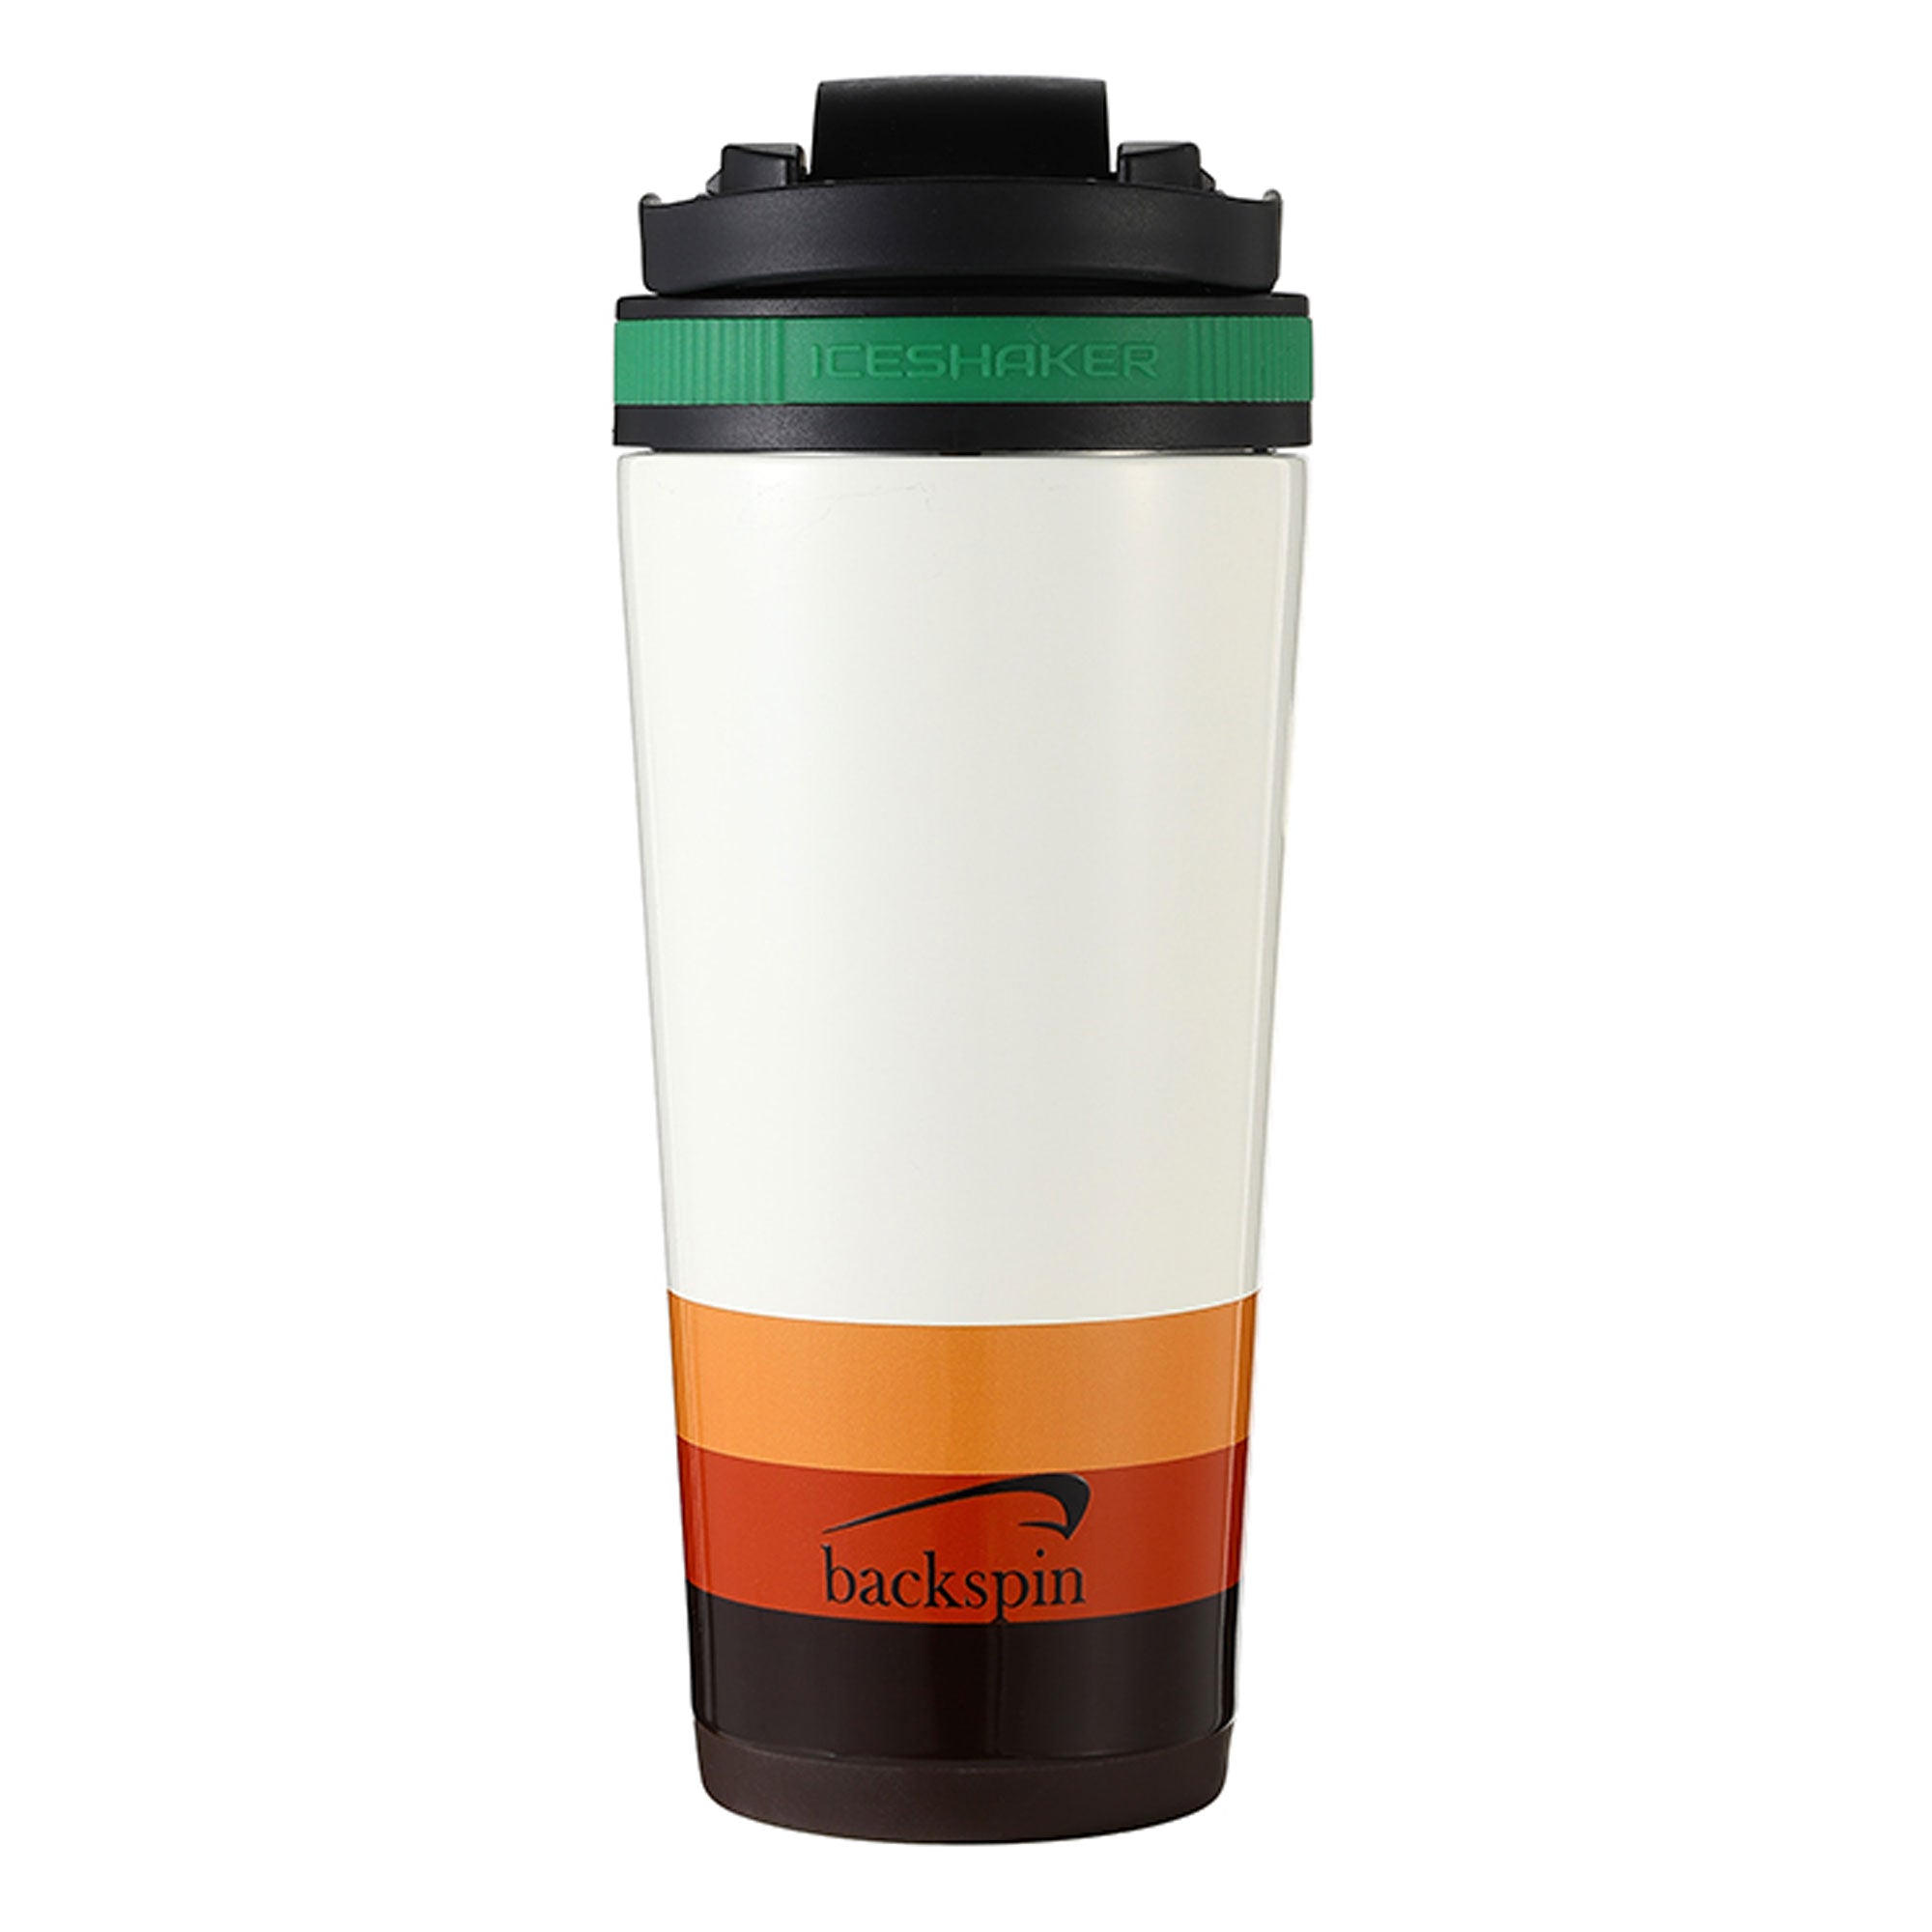 Hot Coffee Cup - Travel Coffee Mug Thermos, easy to carry with you, keeps  cold and warm for 6 hours, fast shipping on AliExpress